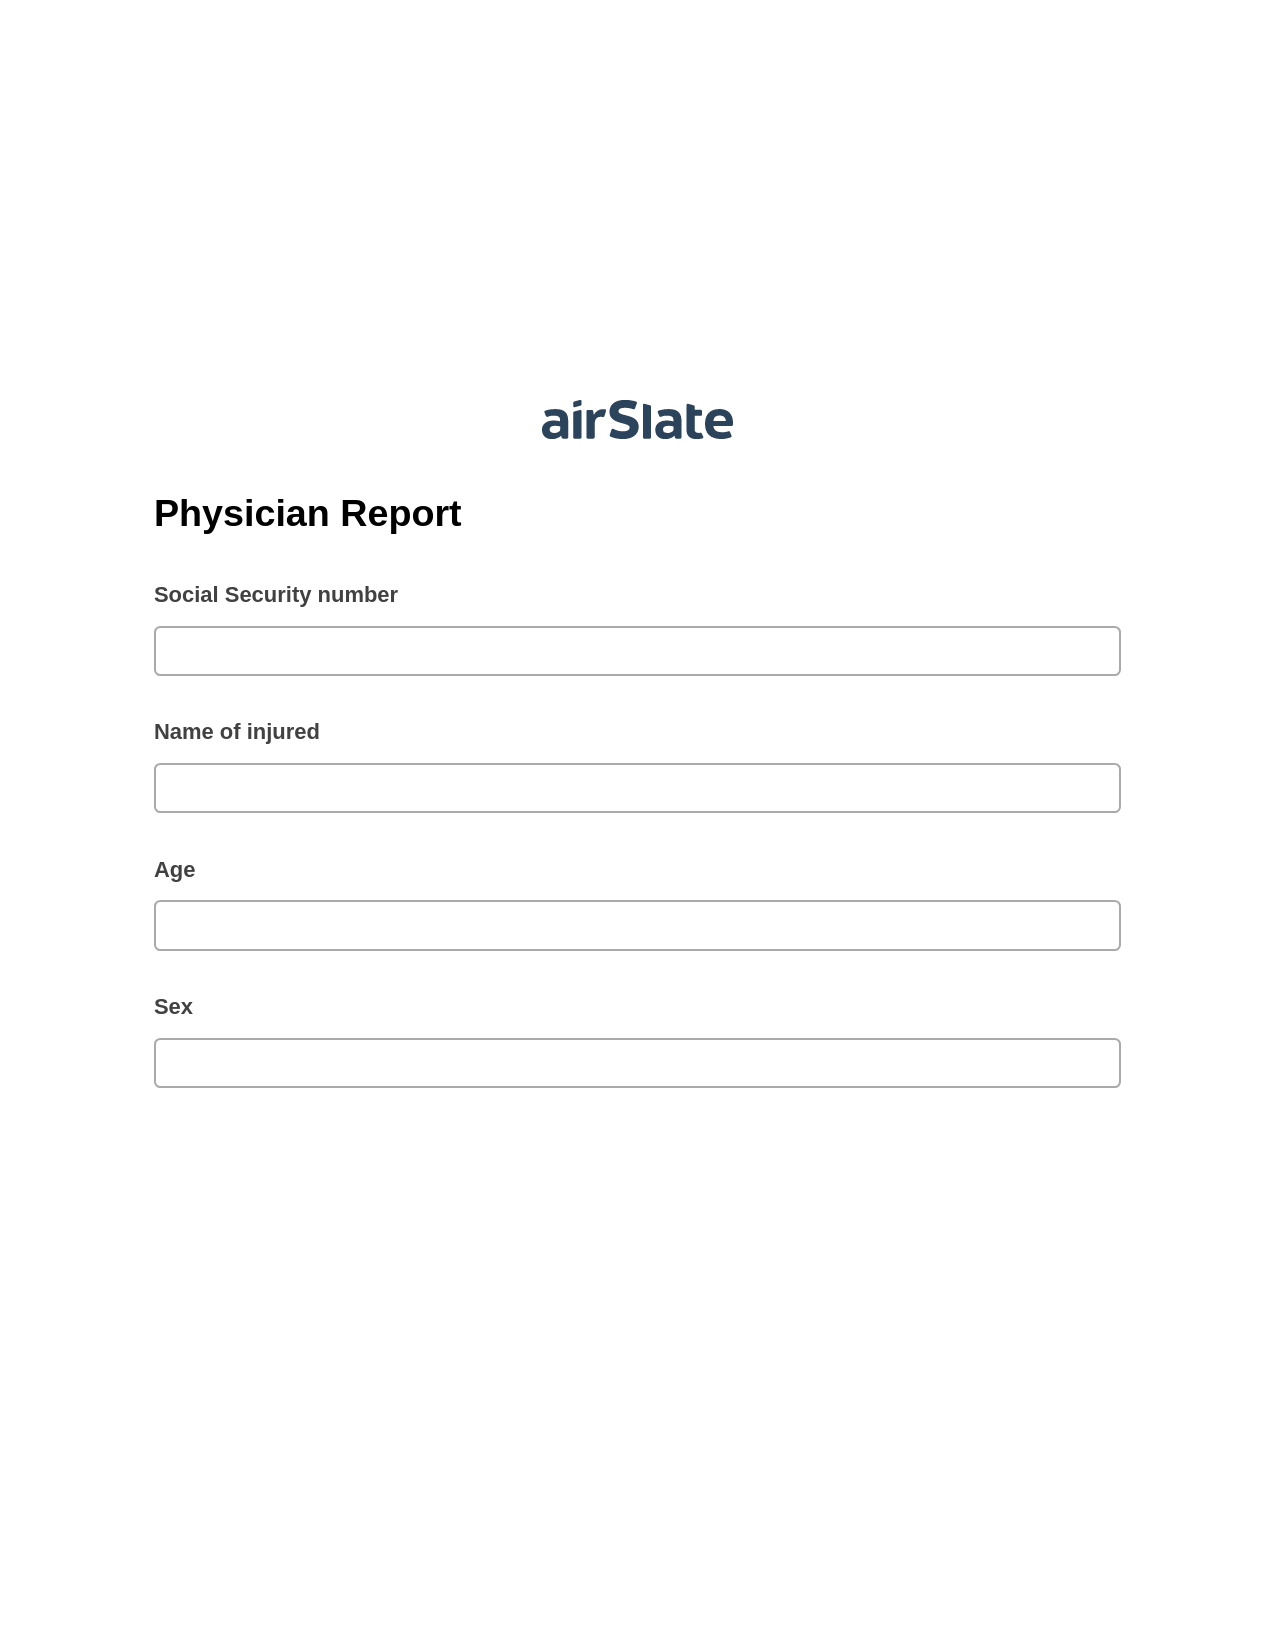 Multirole Physician Report Pre-fill from CSV File Bot, Update NetSuite Record Bot, Archive to Box Bot